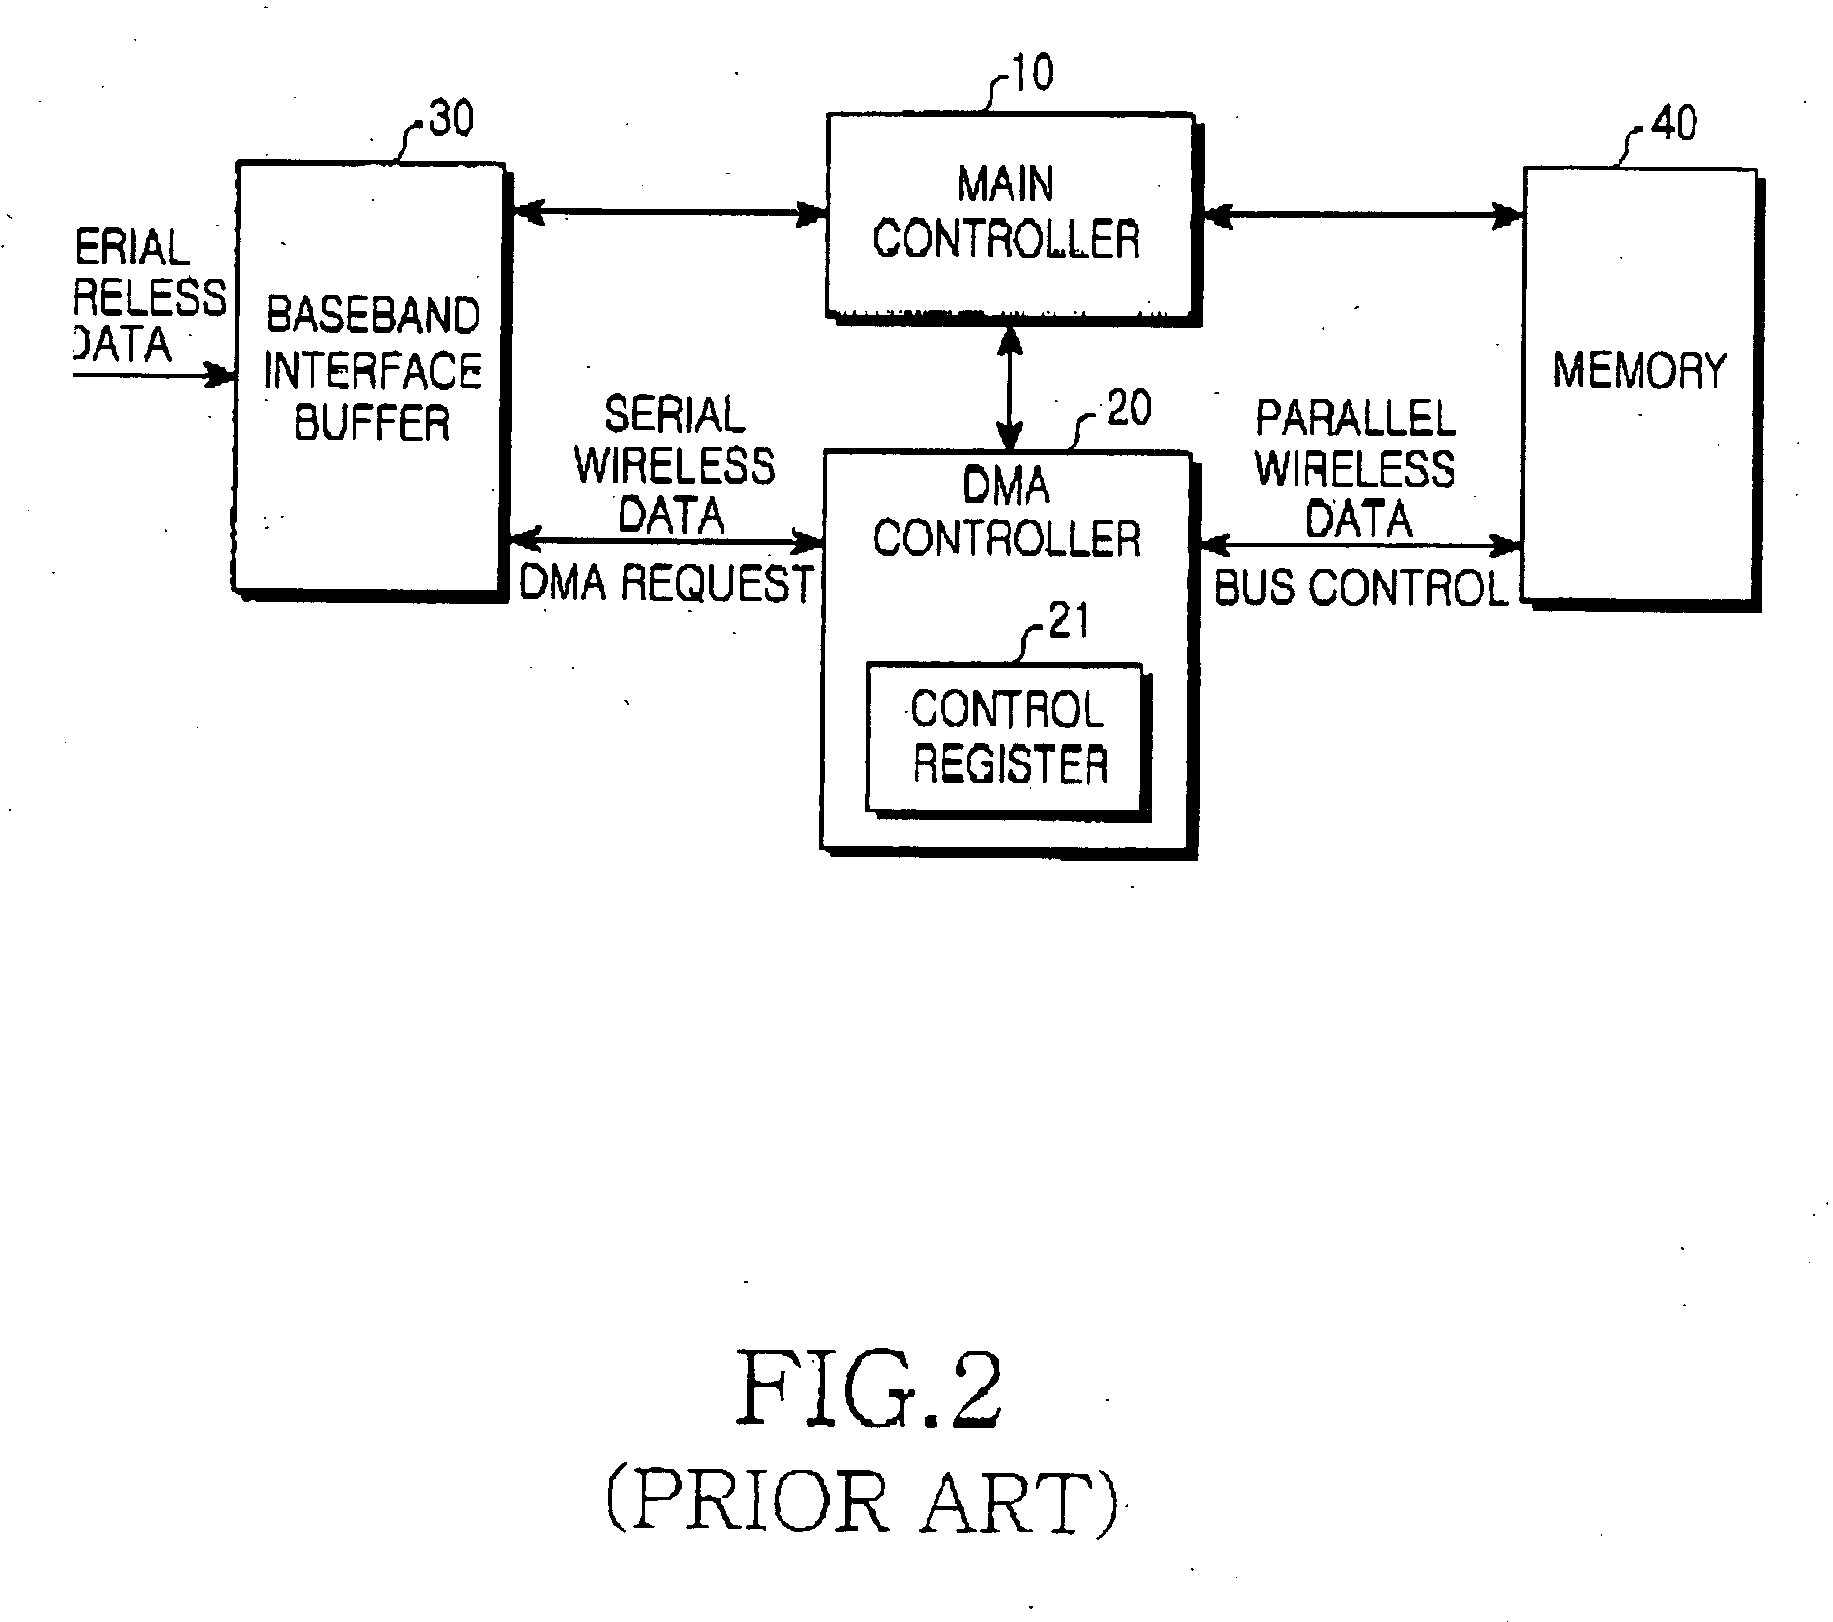 Apparatus and method for controlling direct memory access